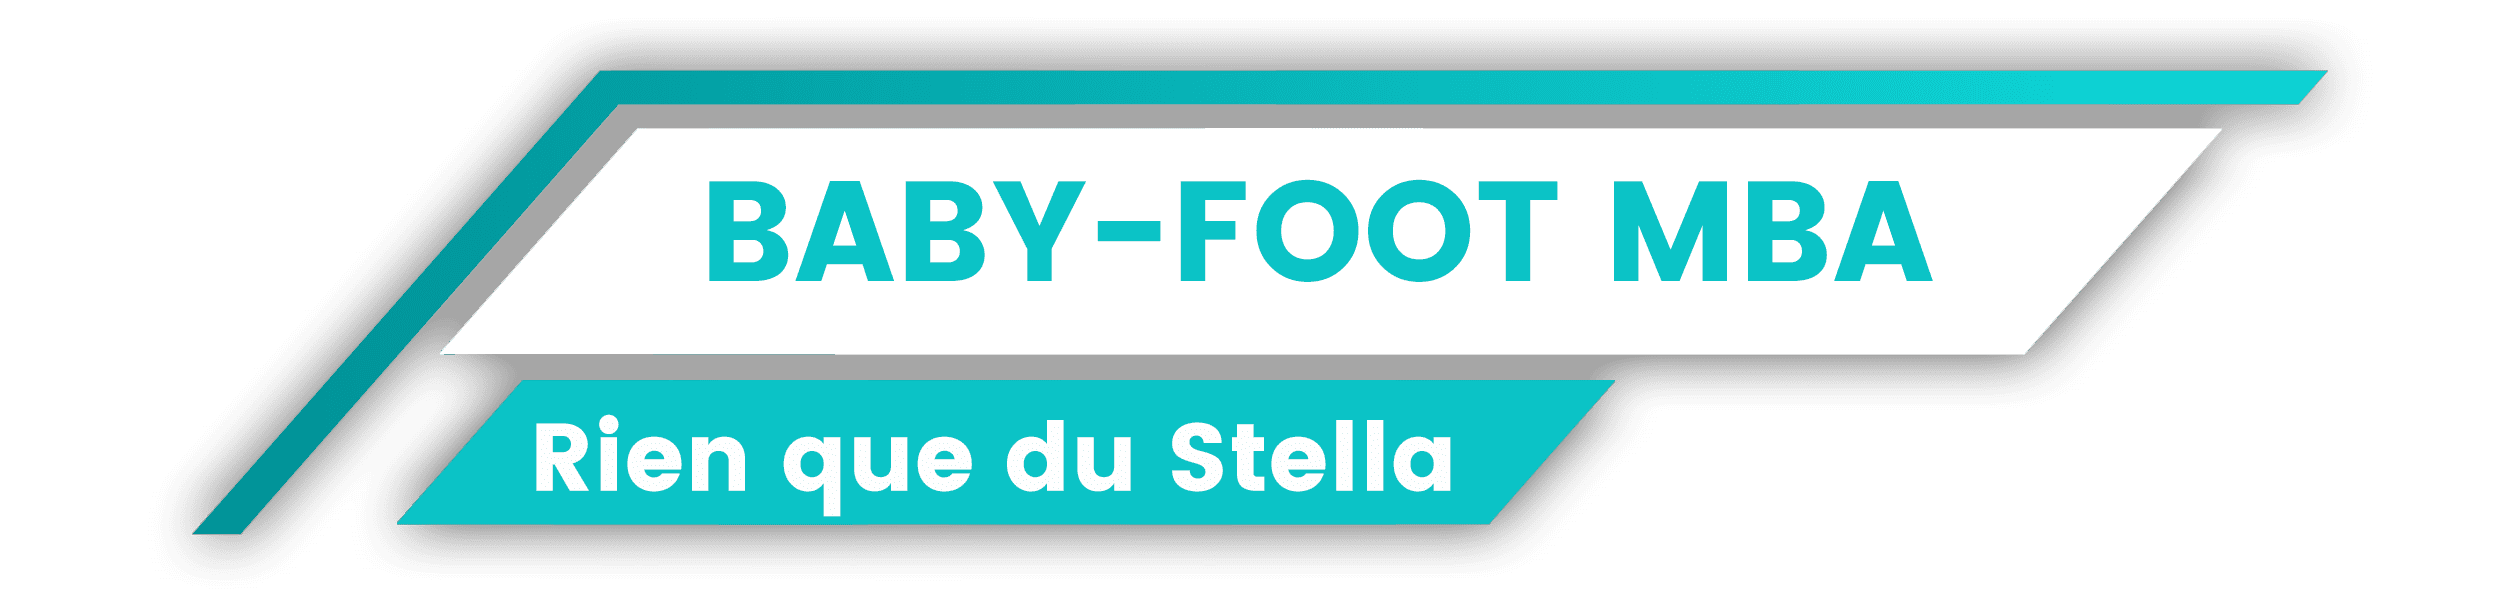 LES BABY-FOOT MBA